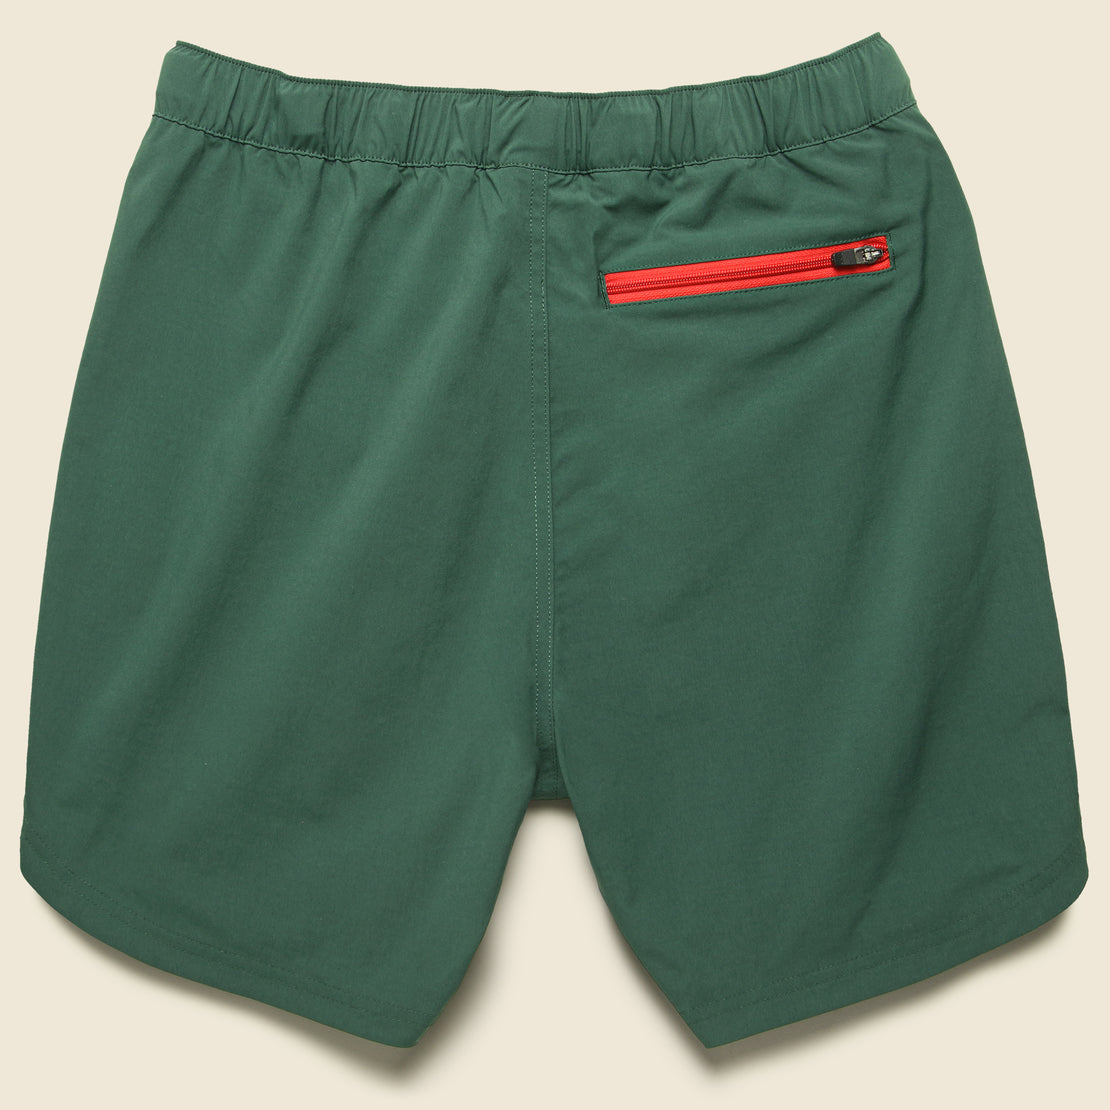 River Shorts - Forest - Topo Designs - STAG Provisions - Shorts - Solid